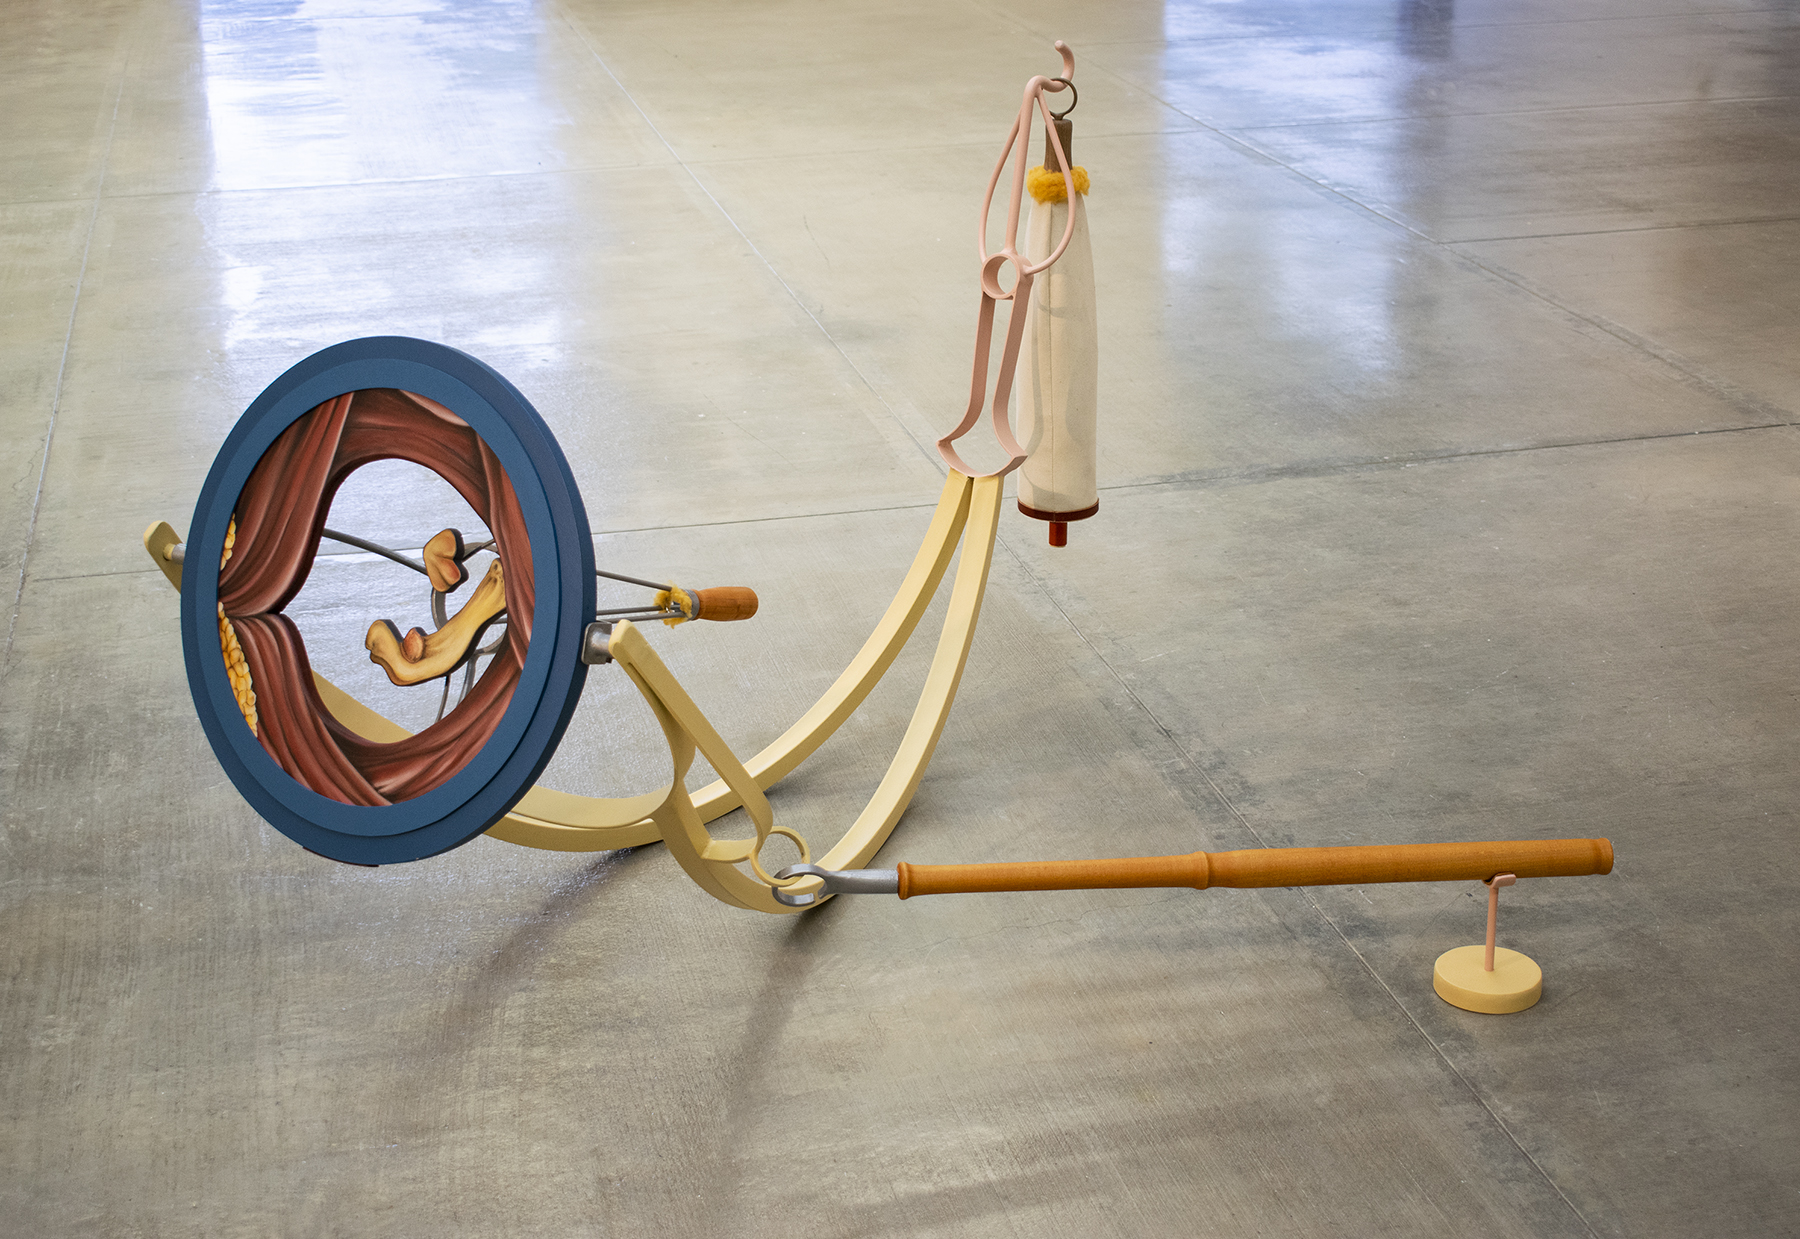 Large scale mixed media sculpture sits on a concrete floor in a gallery. The artwork is abstract and multicolored. On the right of the piece is a blue circle within which is an opening that is painted in trompe l'oeil style to resemble folds and flesh or bone like forms. The circle is attached to two pieces of bent metal, painted light yellow, which sit on the floor. At the other end of the bent metal is a pink metal wire form from which is suspended a white fabric baglike shape. On the bottom right of the sculpture is a long wooden pole that extends from the yellow metal curves across to a small orange stand.